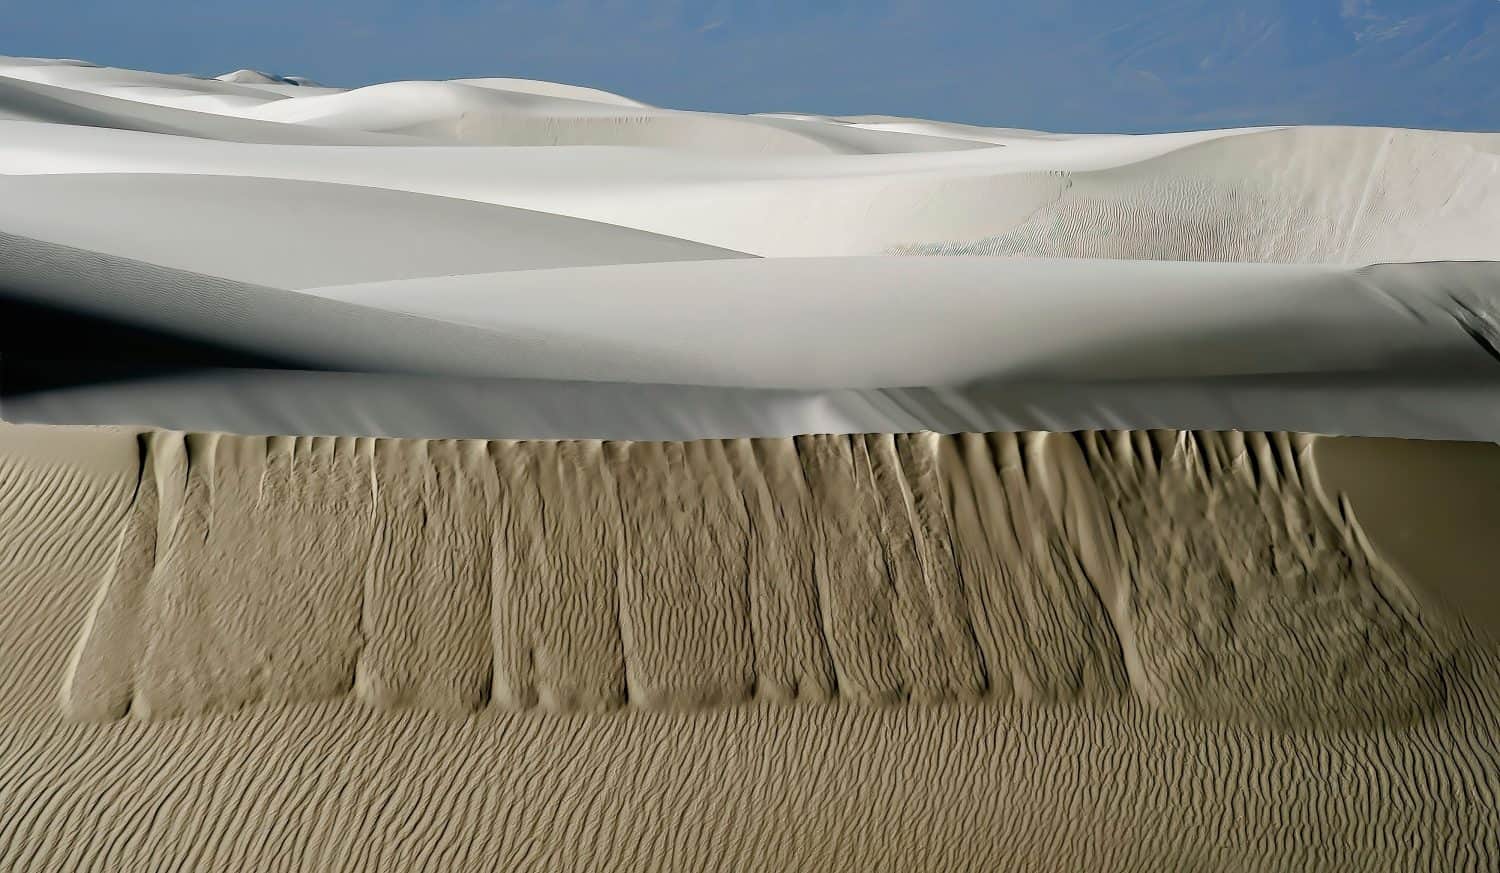 Wind Blown gypsum dunes covering several hundred acres of the New Mexico landscape.